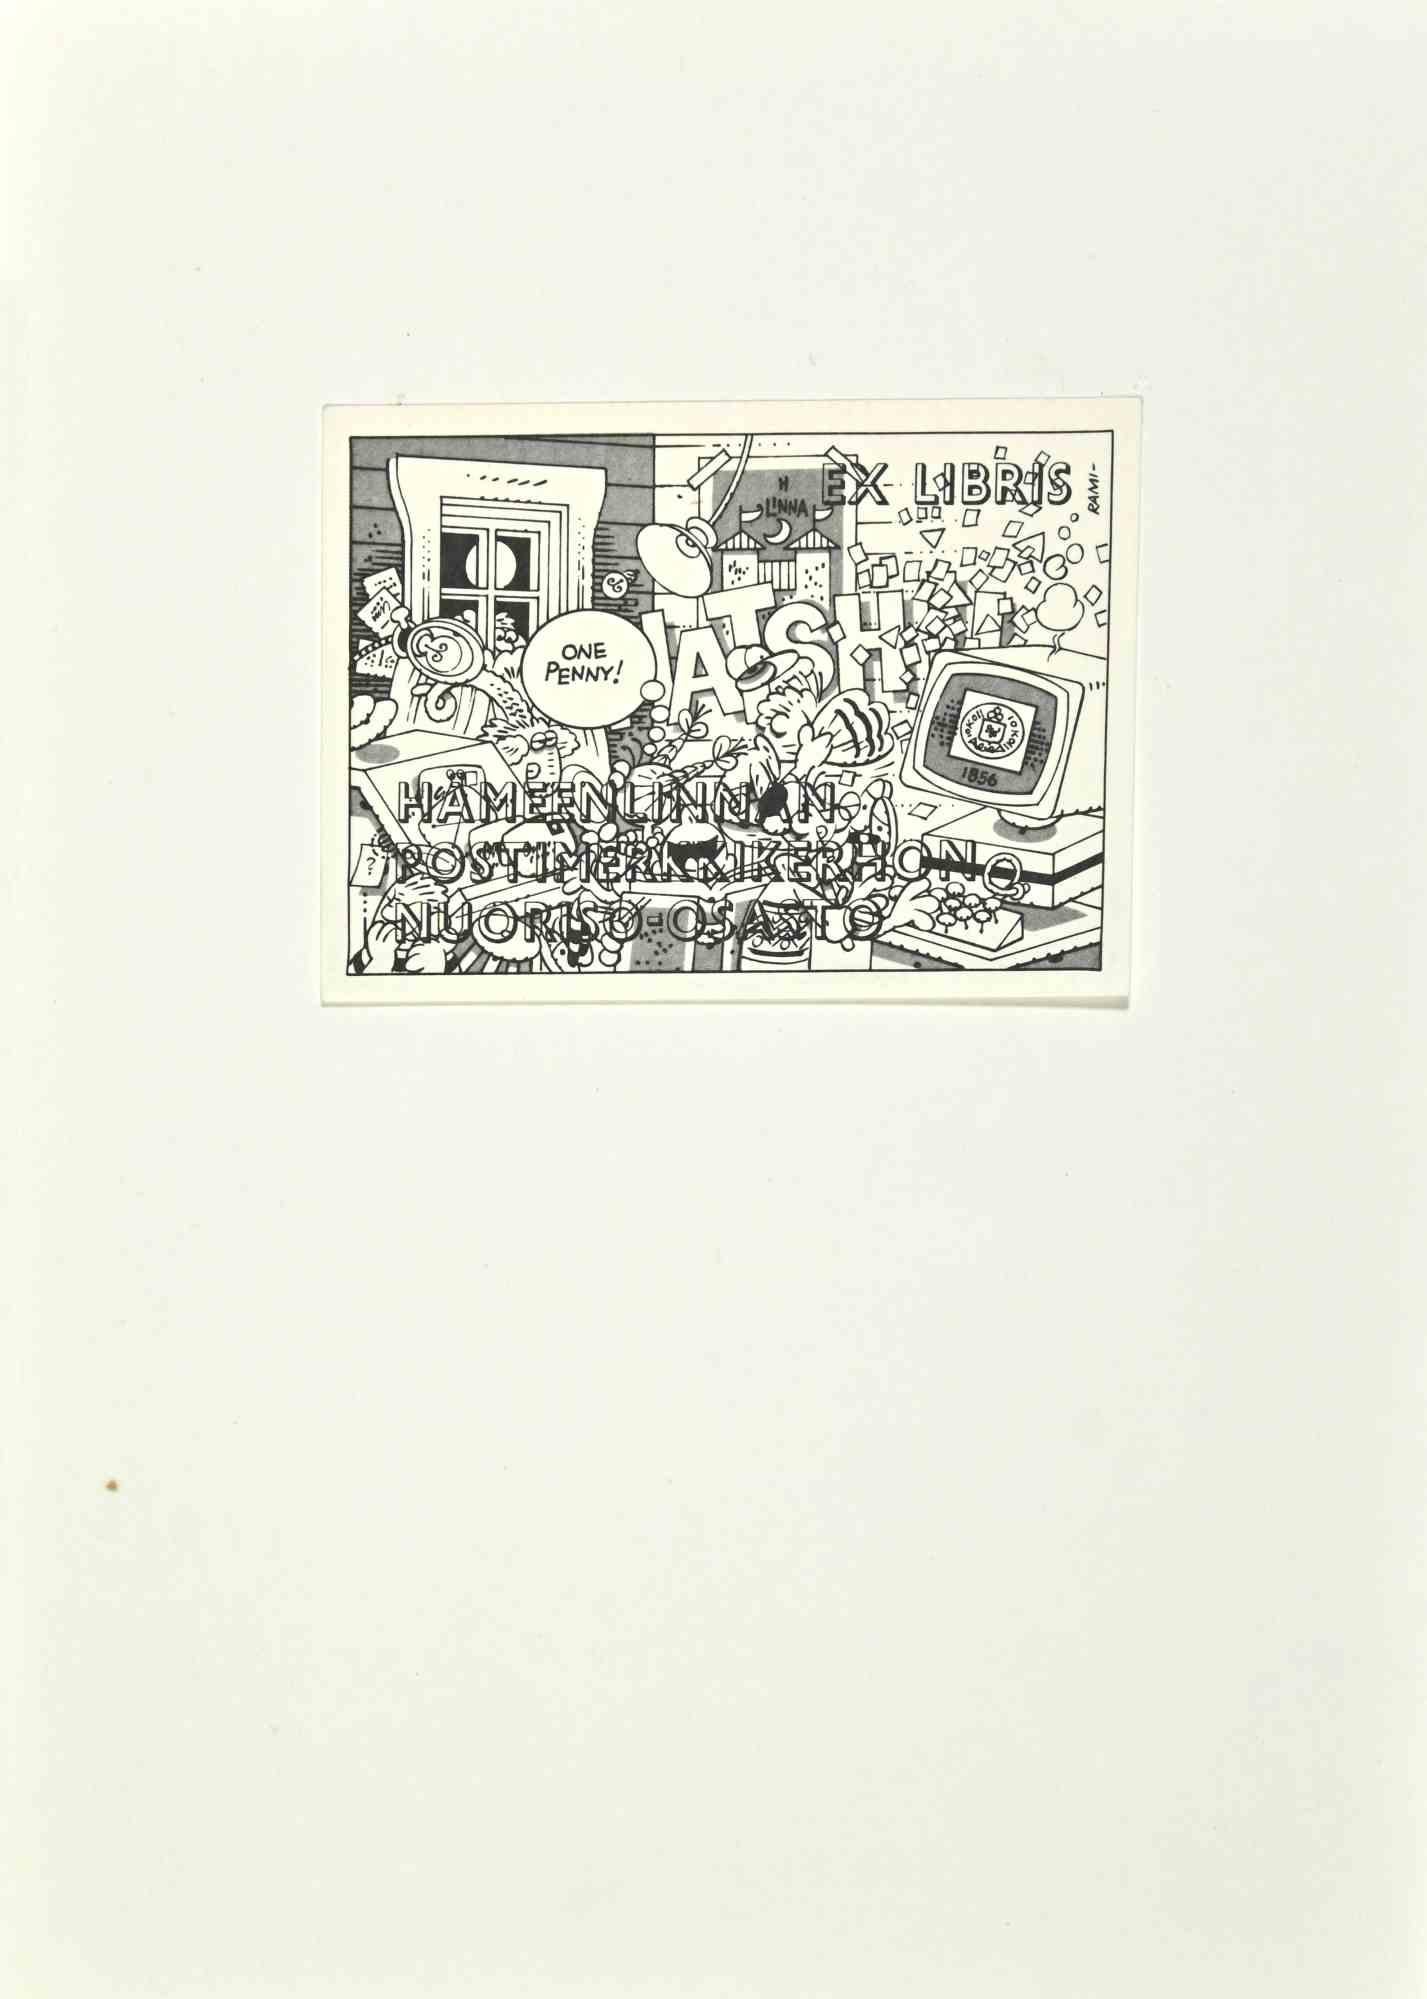  Ex Libris  - Raimo Huittinen is a Modern Artwork realized in 1997, by Raimo Huittinen.
 
Ex Libris. B/W woodcut on paper.  Hand signed and dated on the back.
 
The work is glued on cardboard.
 
Total dimensions: 21x 15 cm.

Good conditions.

The